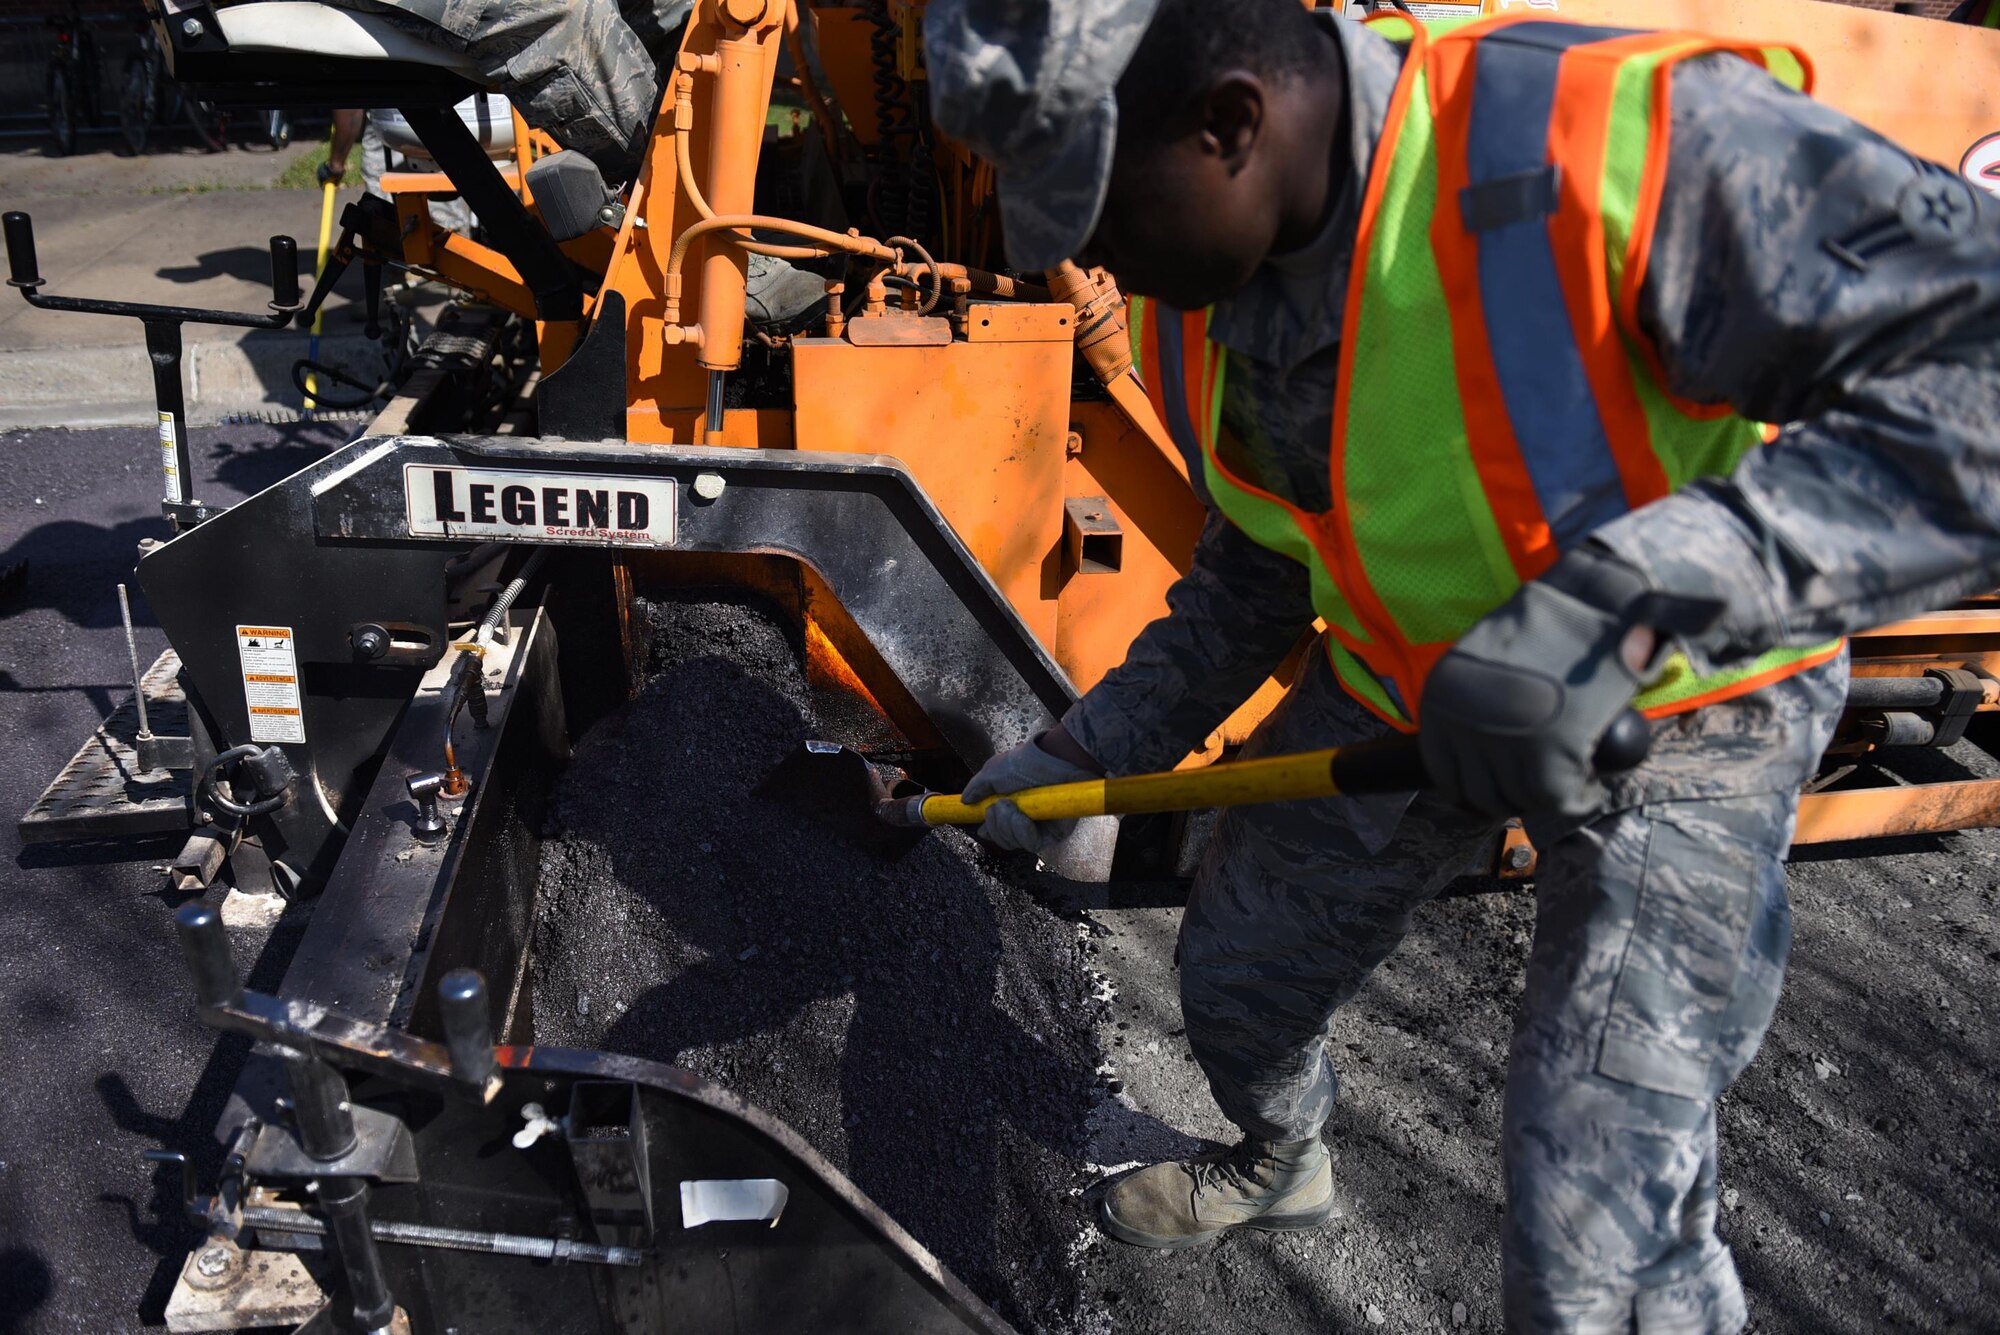 U.S. Air Force Airman 1st Class Lawrence Amihere, 19th Civil Engineer Squadron pavement and heavy equipment journeyman, performs asphalt paving operations Jan. 7, 2017, at Little Rock Air Force Base, Ark. Airmen of the pavements and heavy equipment shop, also known as “Dirt Boyz”, work long hours in unforgiving weather to maintain the base’s airfield, roads, fences and drainage systems. (U.S. Air Force photo by Airman 1st Class Kevin Sommer Giron)